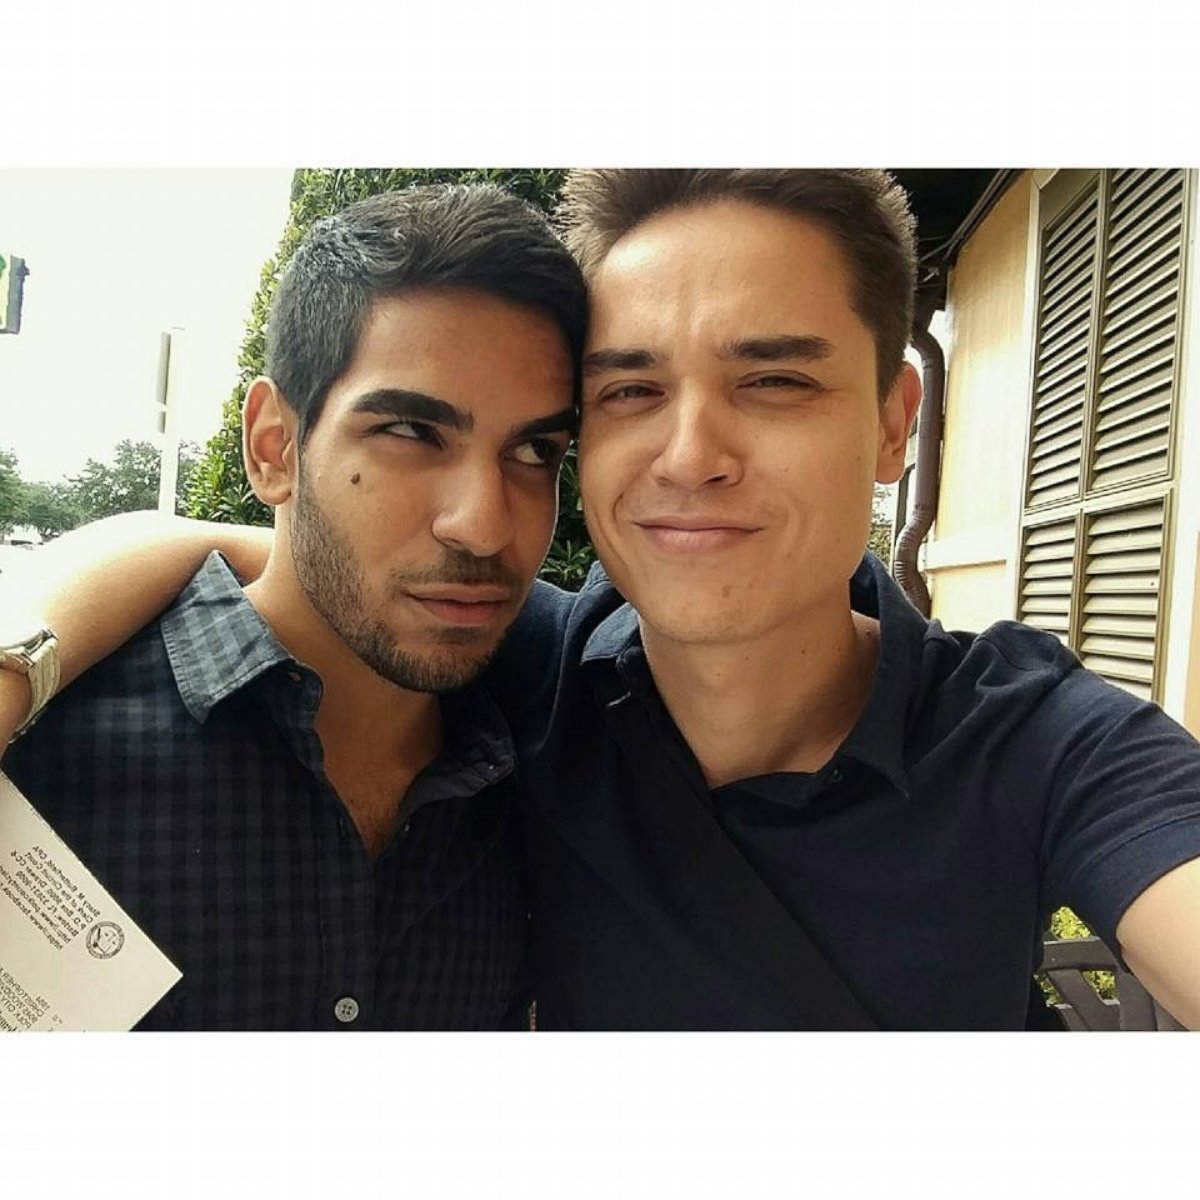 PHOTO: This undated photo shows Juan Guerrero and Christophe Leinonen, one of the people killed in the Pulse nightclub in Orlando, Fla., early Sunday, June 12, 2016. 